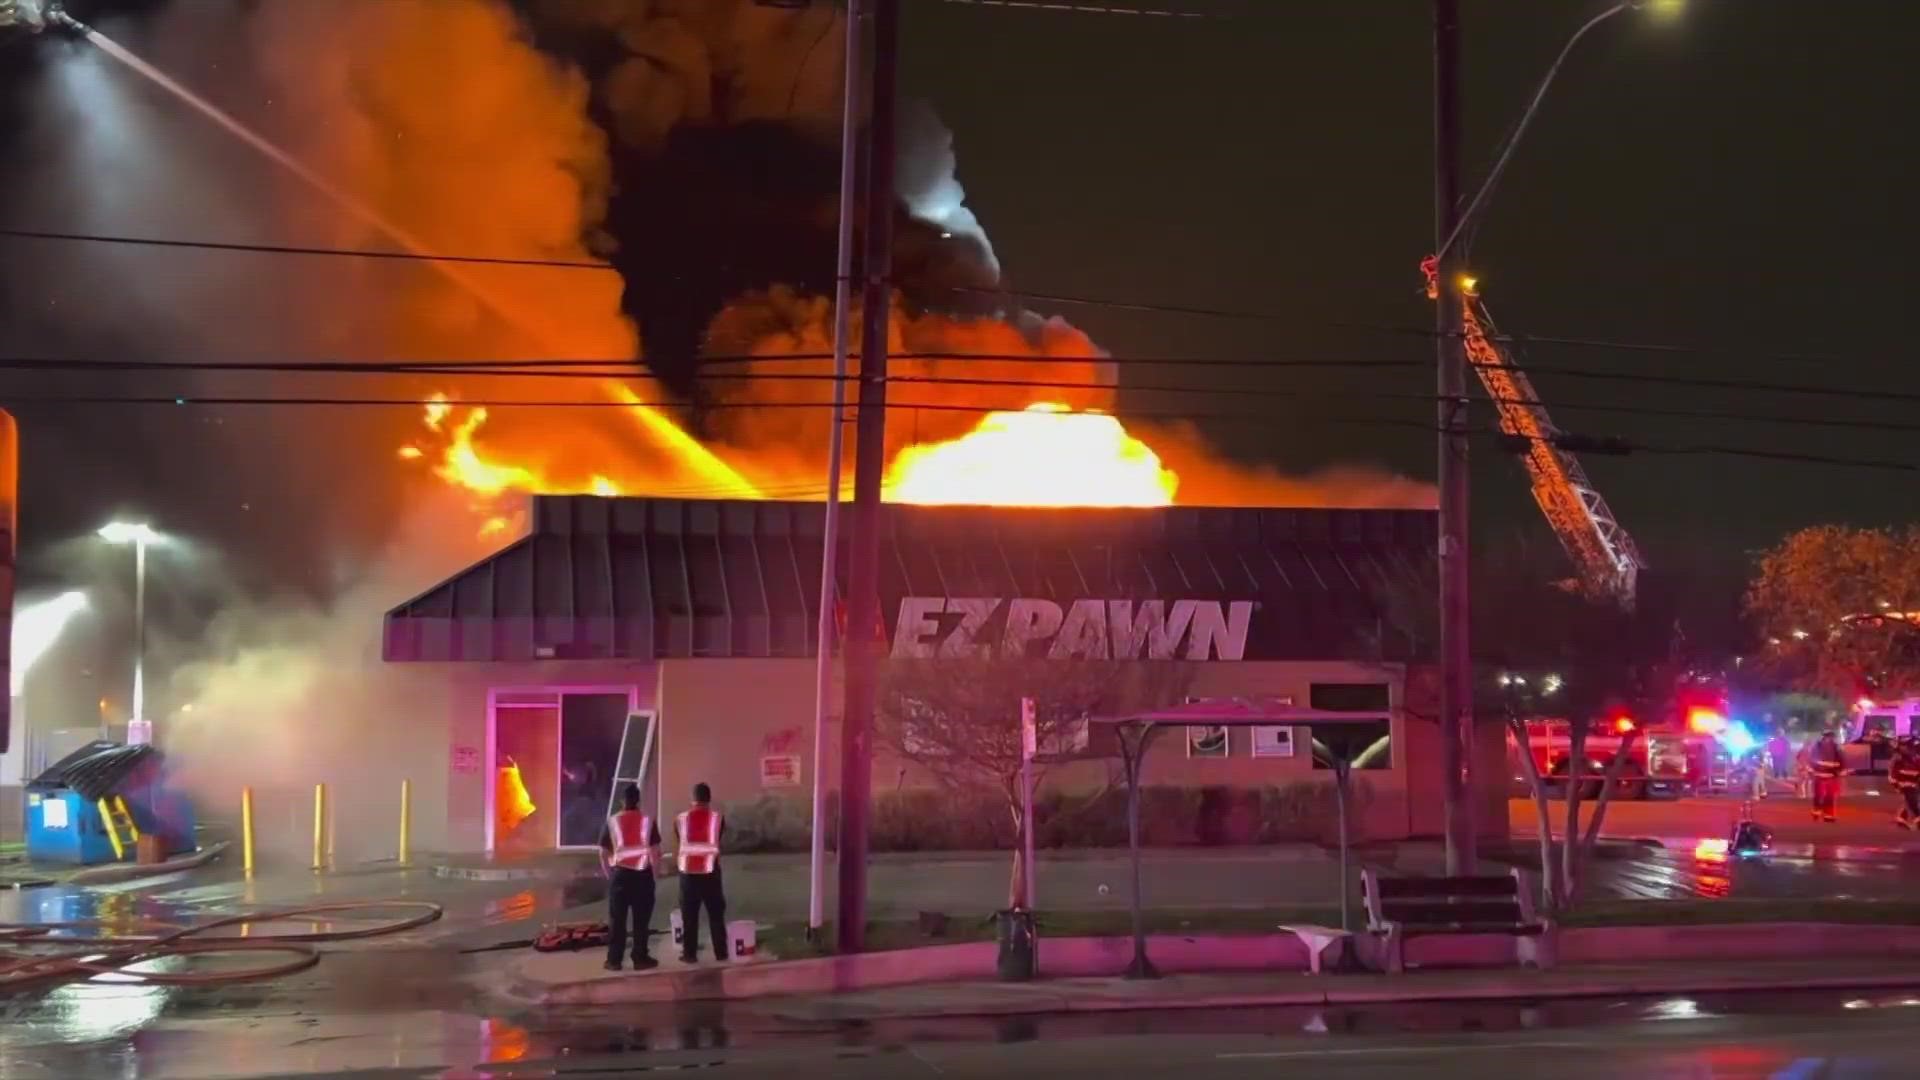 San Antonio pawn shop on southeast side destroyed by fire | kens5.com